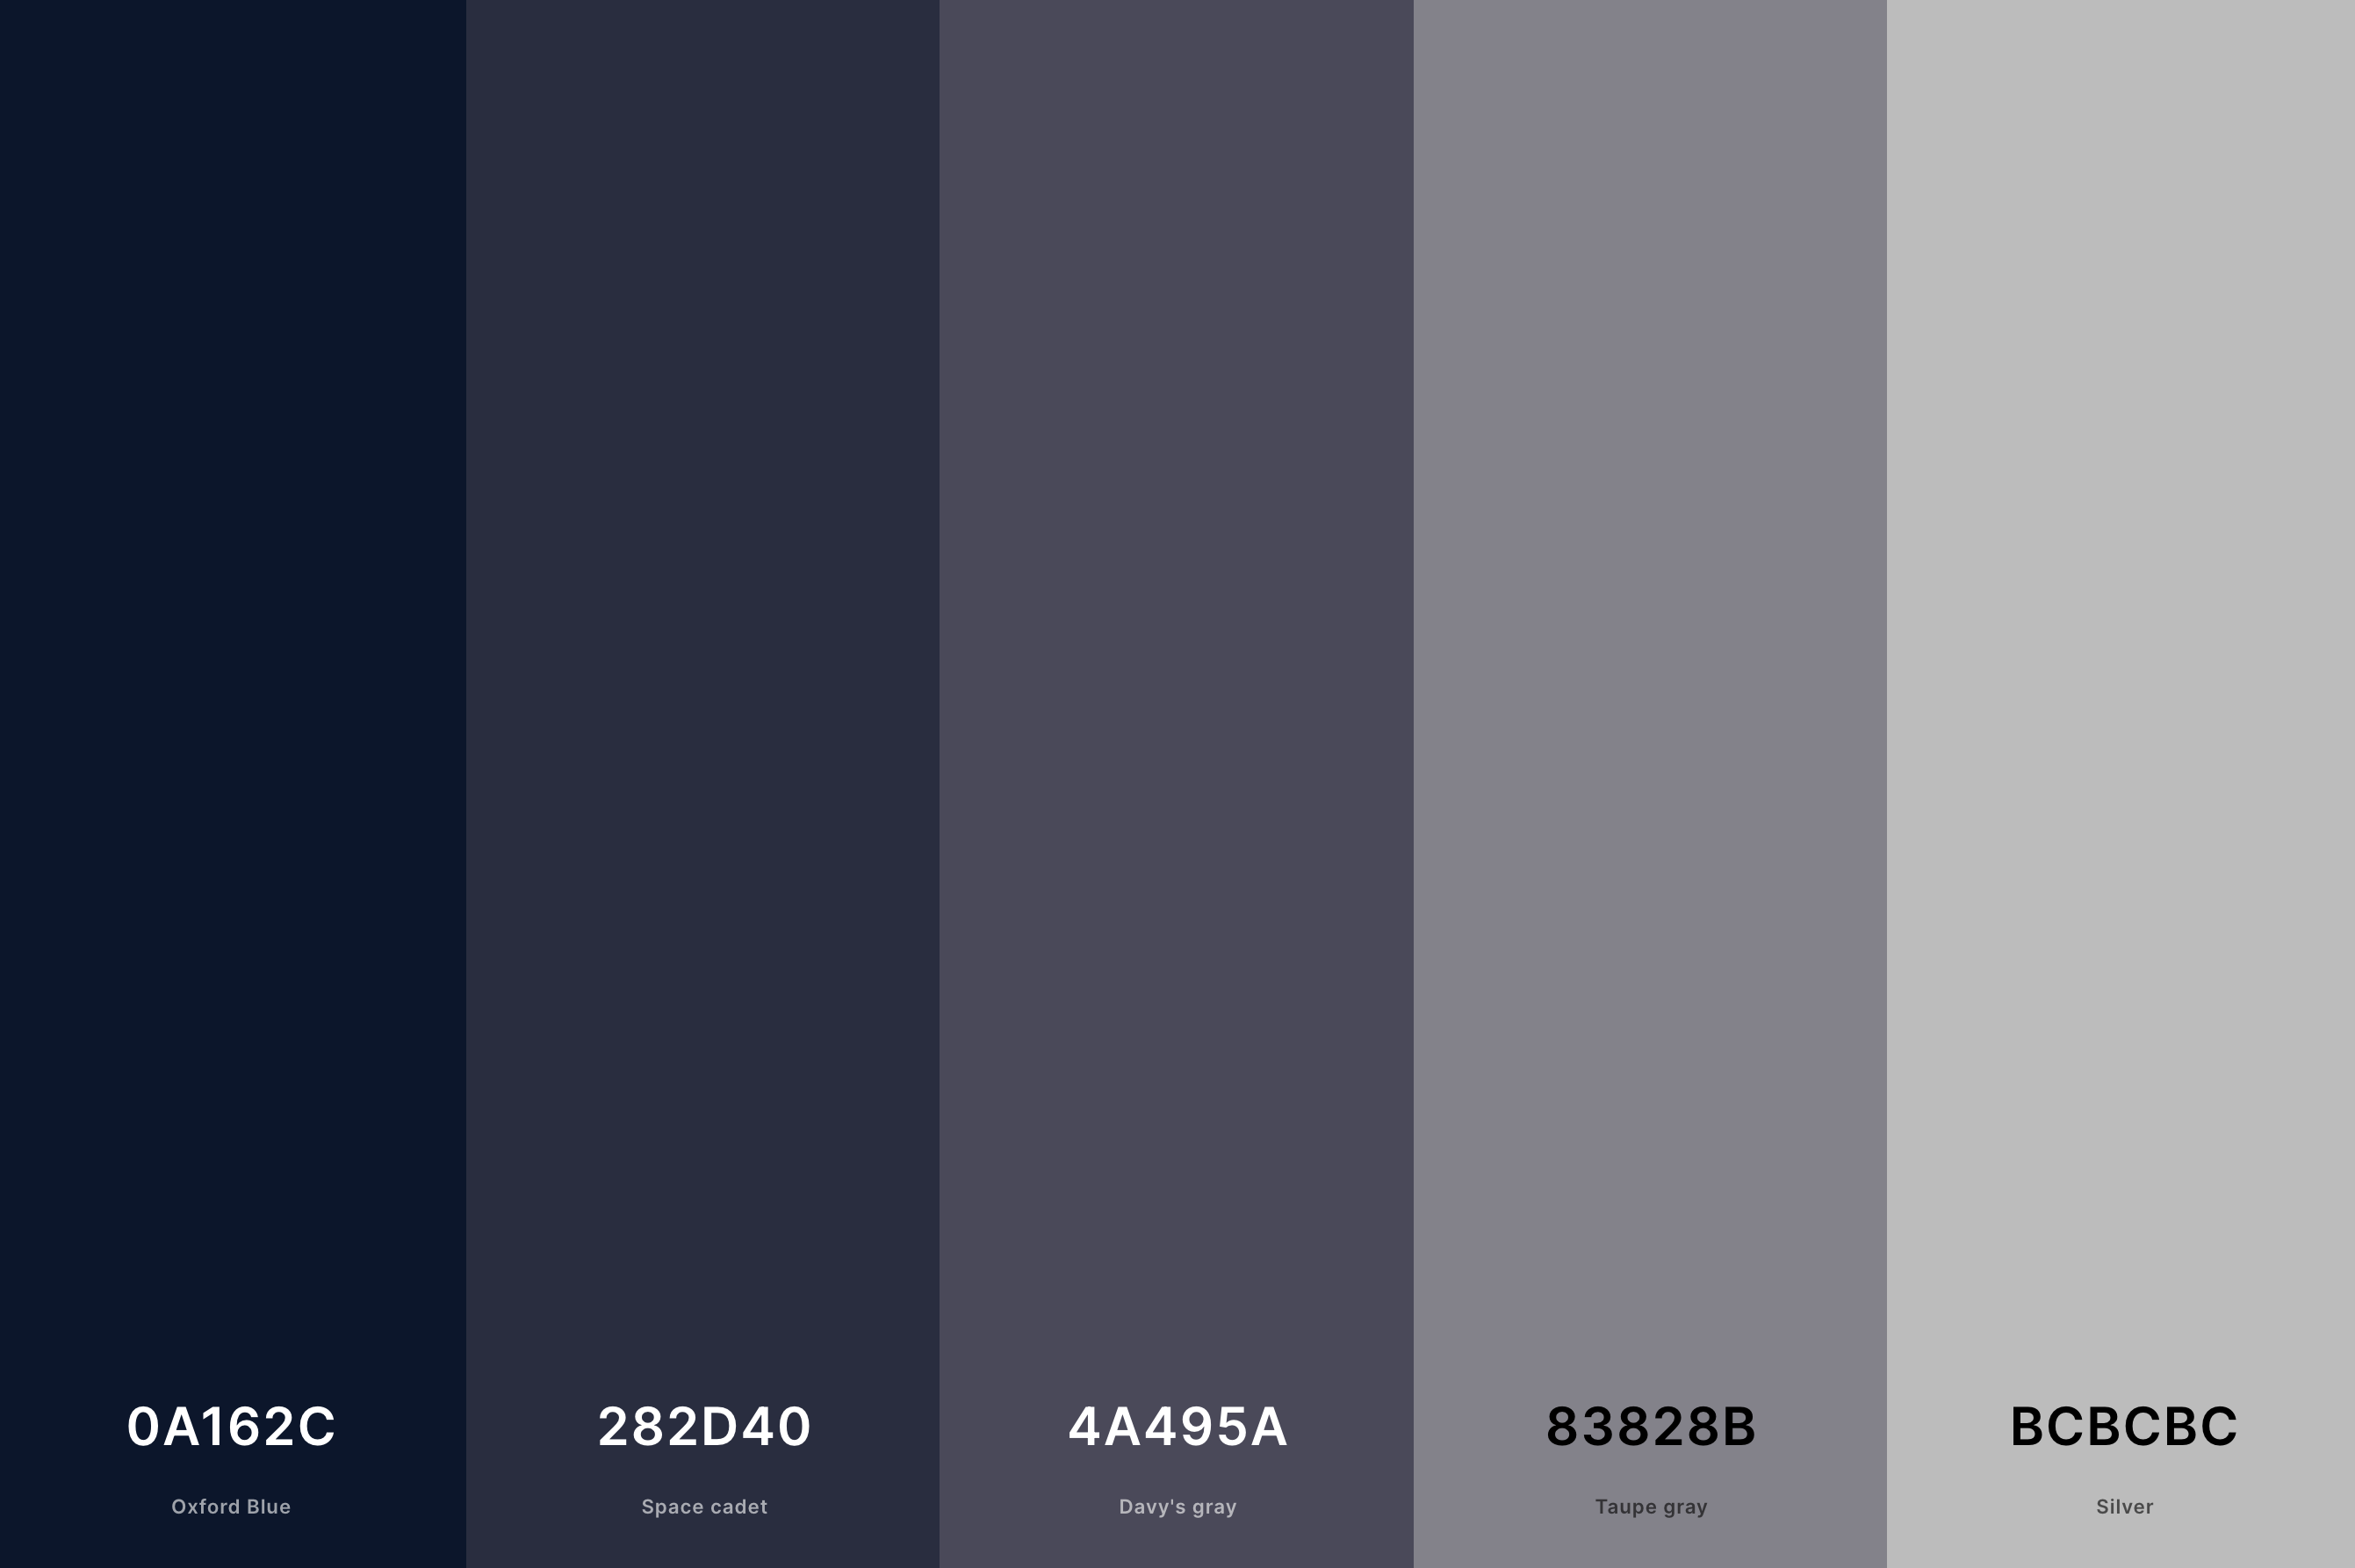 5. Aesthetic Dark Color Palette Color Palette with Oxford Blue (Hex #0A162C) + Space Cadet (Hex #282D40) + Davy'S Gray (Hex #4A495A) + Taupe Gray (Hex #83828B) + Silver (Hex #BCBCBC) Color Palette with Hex Codes